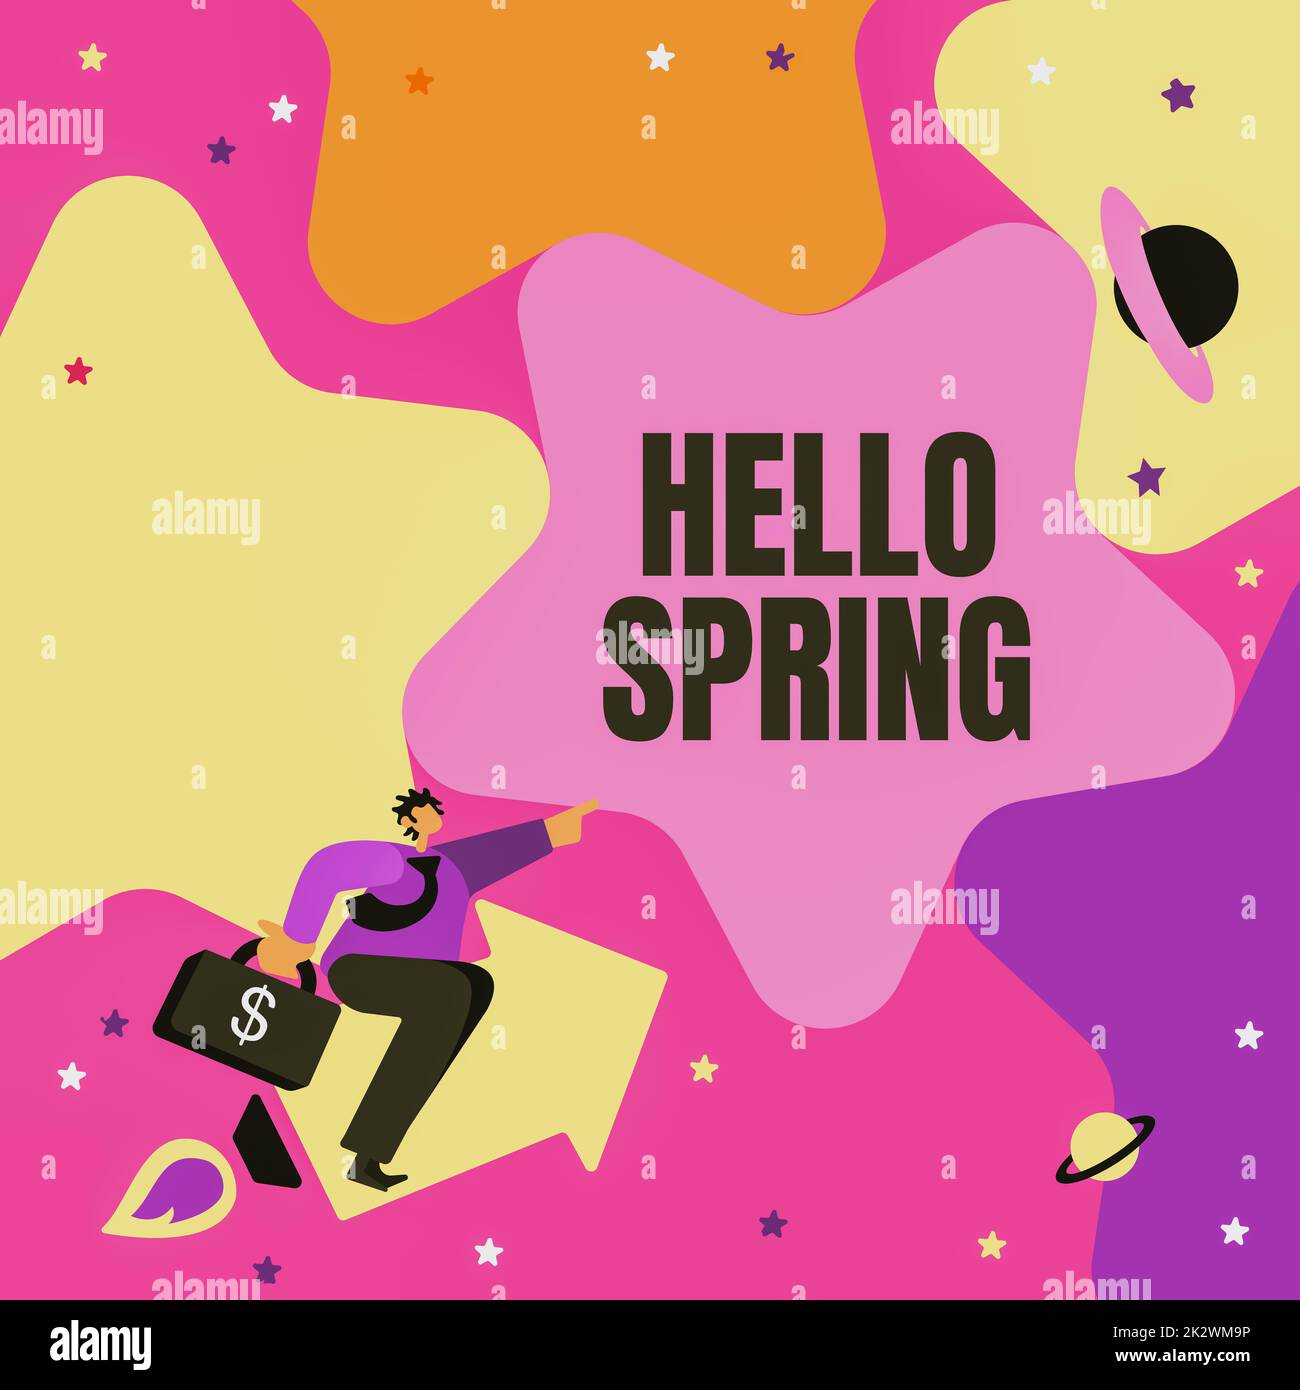 Sign displaying Hello Spring. Business showcase Welcoming the season after the winter Blossoming of flowers Gentleman Pointing Finger Star Representing Financial Success. Stock Photo